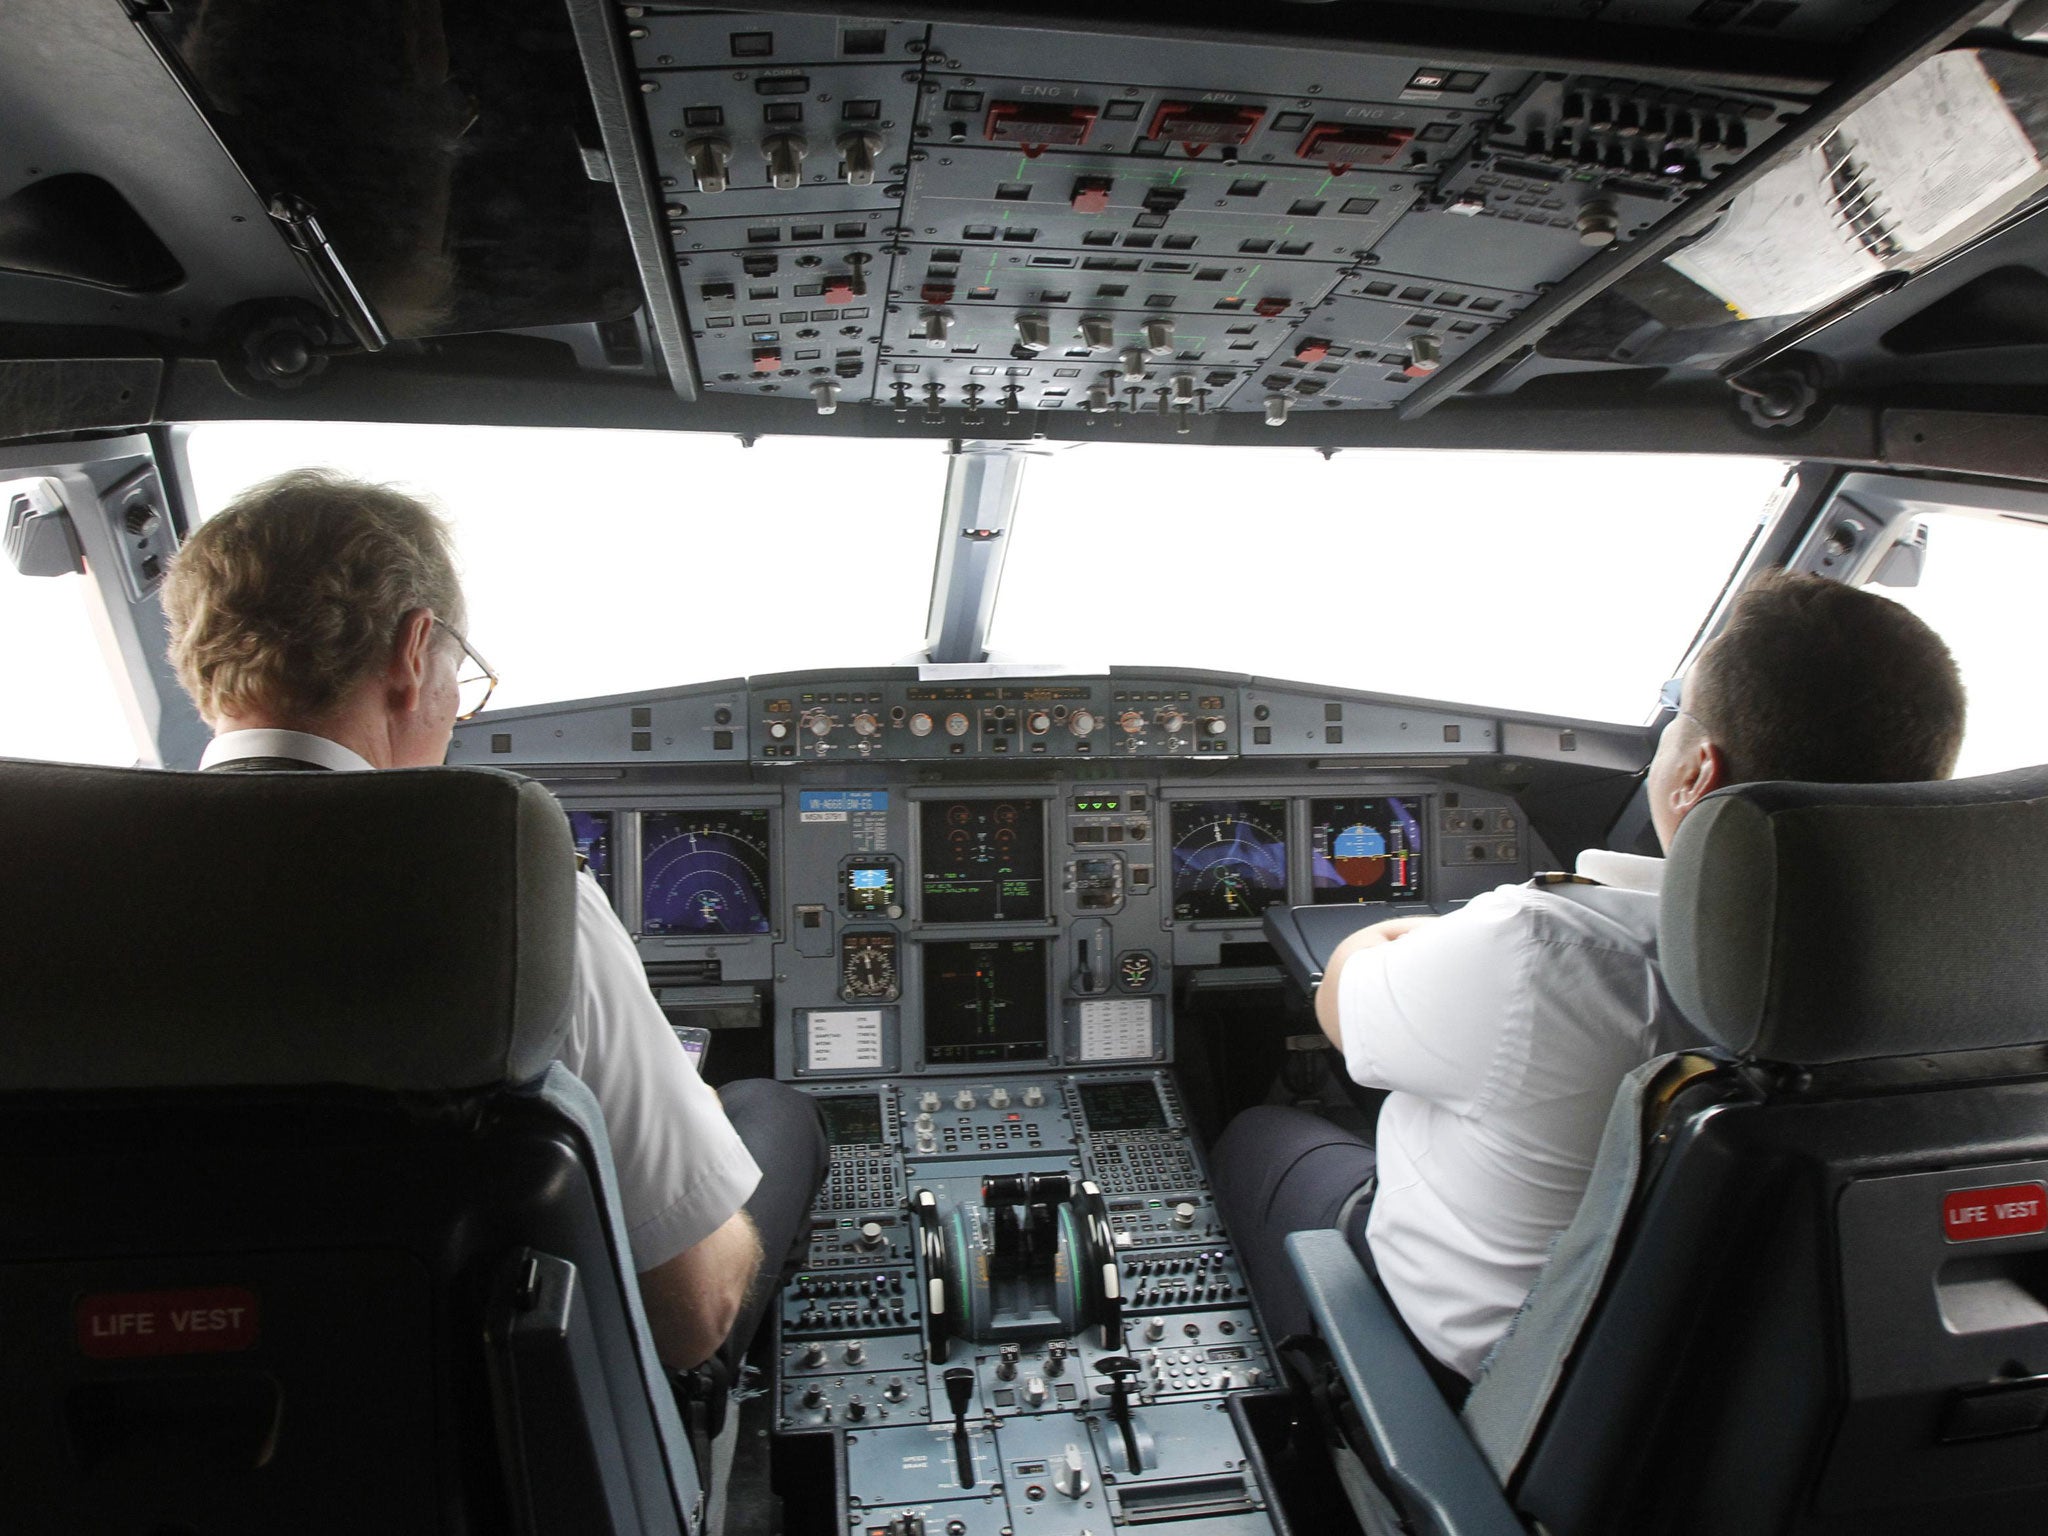 Proposed new rules on pilots’ working hours could lead to air crews flying while 'dangerously fatigued', union officials have warned